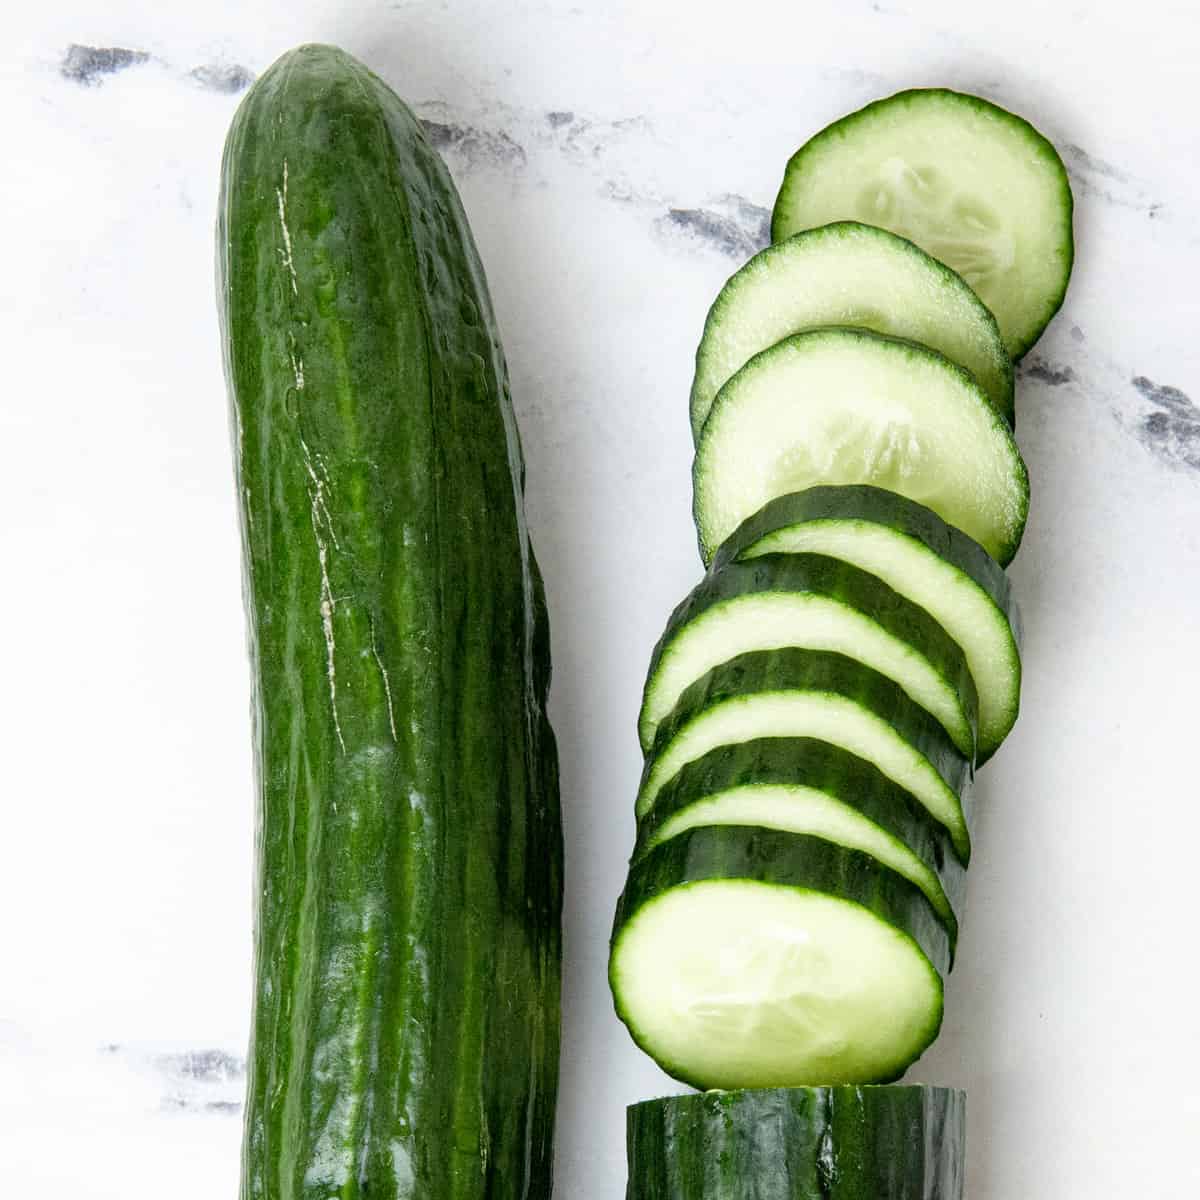 Cucumbers sliced on a kitchen counter, with an uncut cucumber next to it.